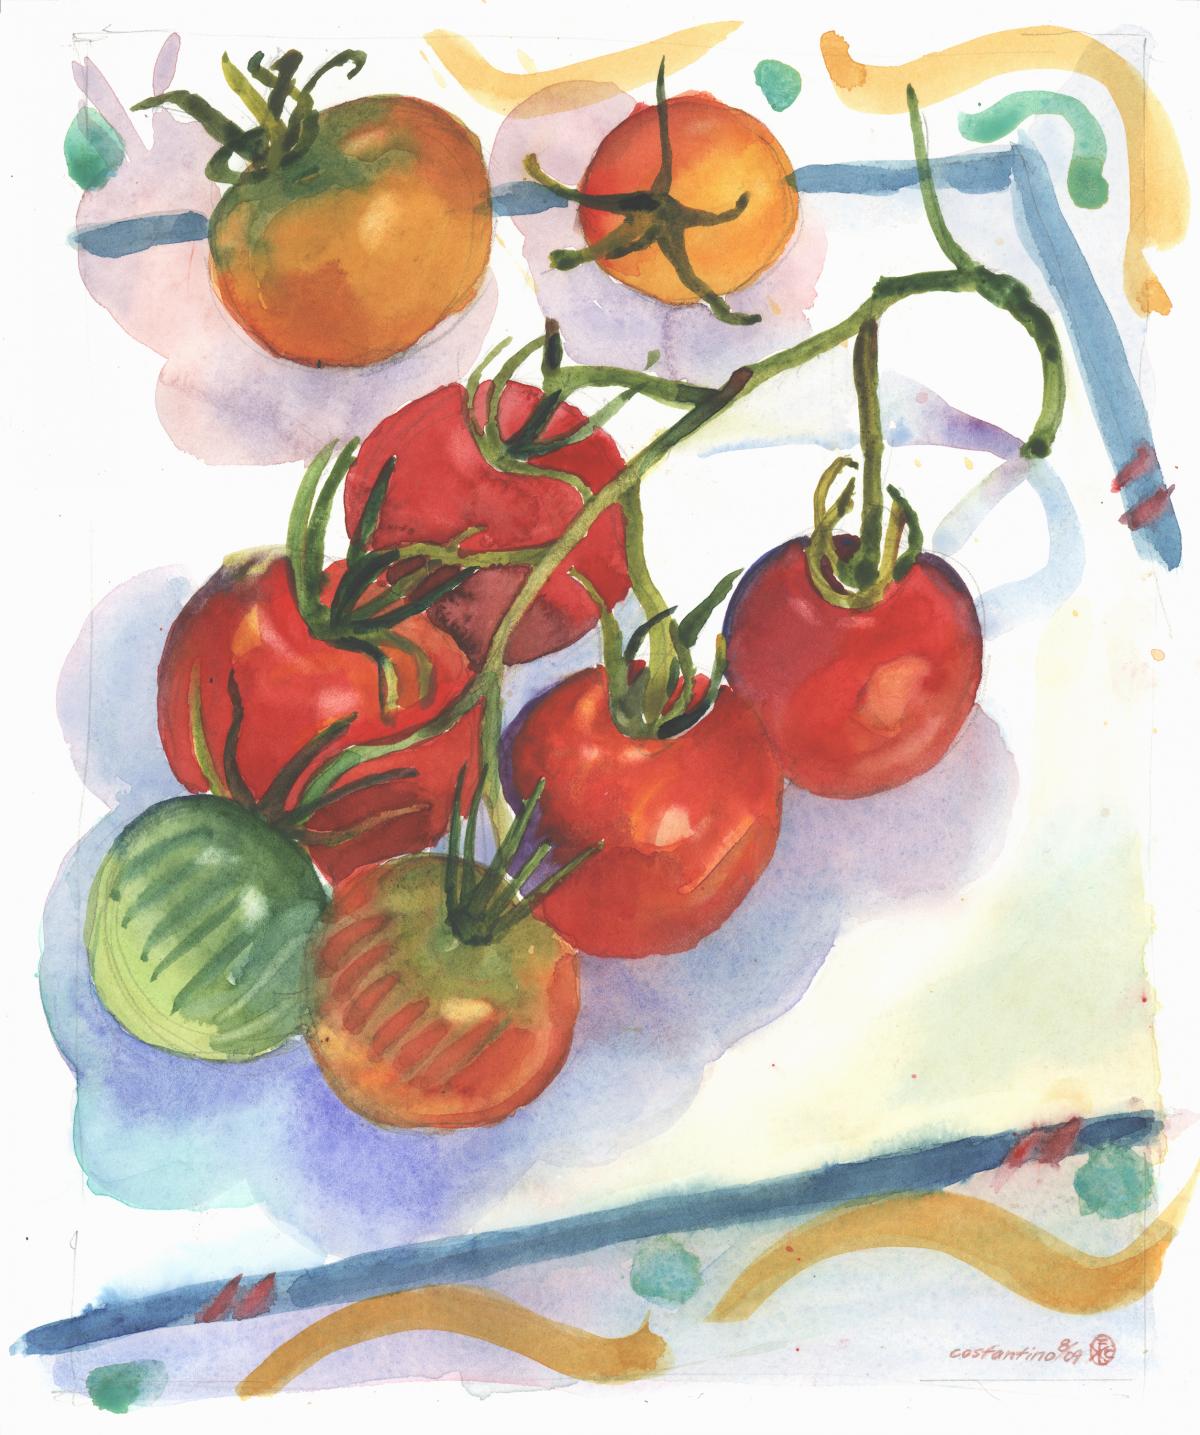 A simple study in reds and oranges, with greens, of an end of season patio tomato vine, showing the varied color stages of ripeness. The playful borders tied the composition together.